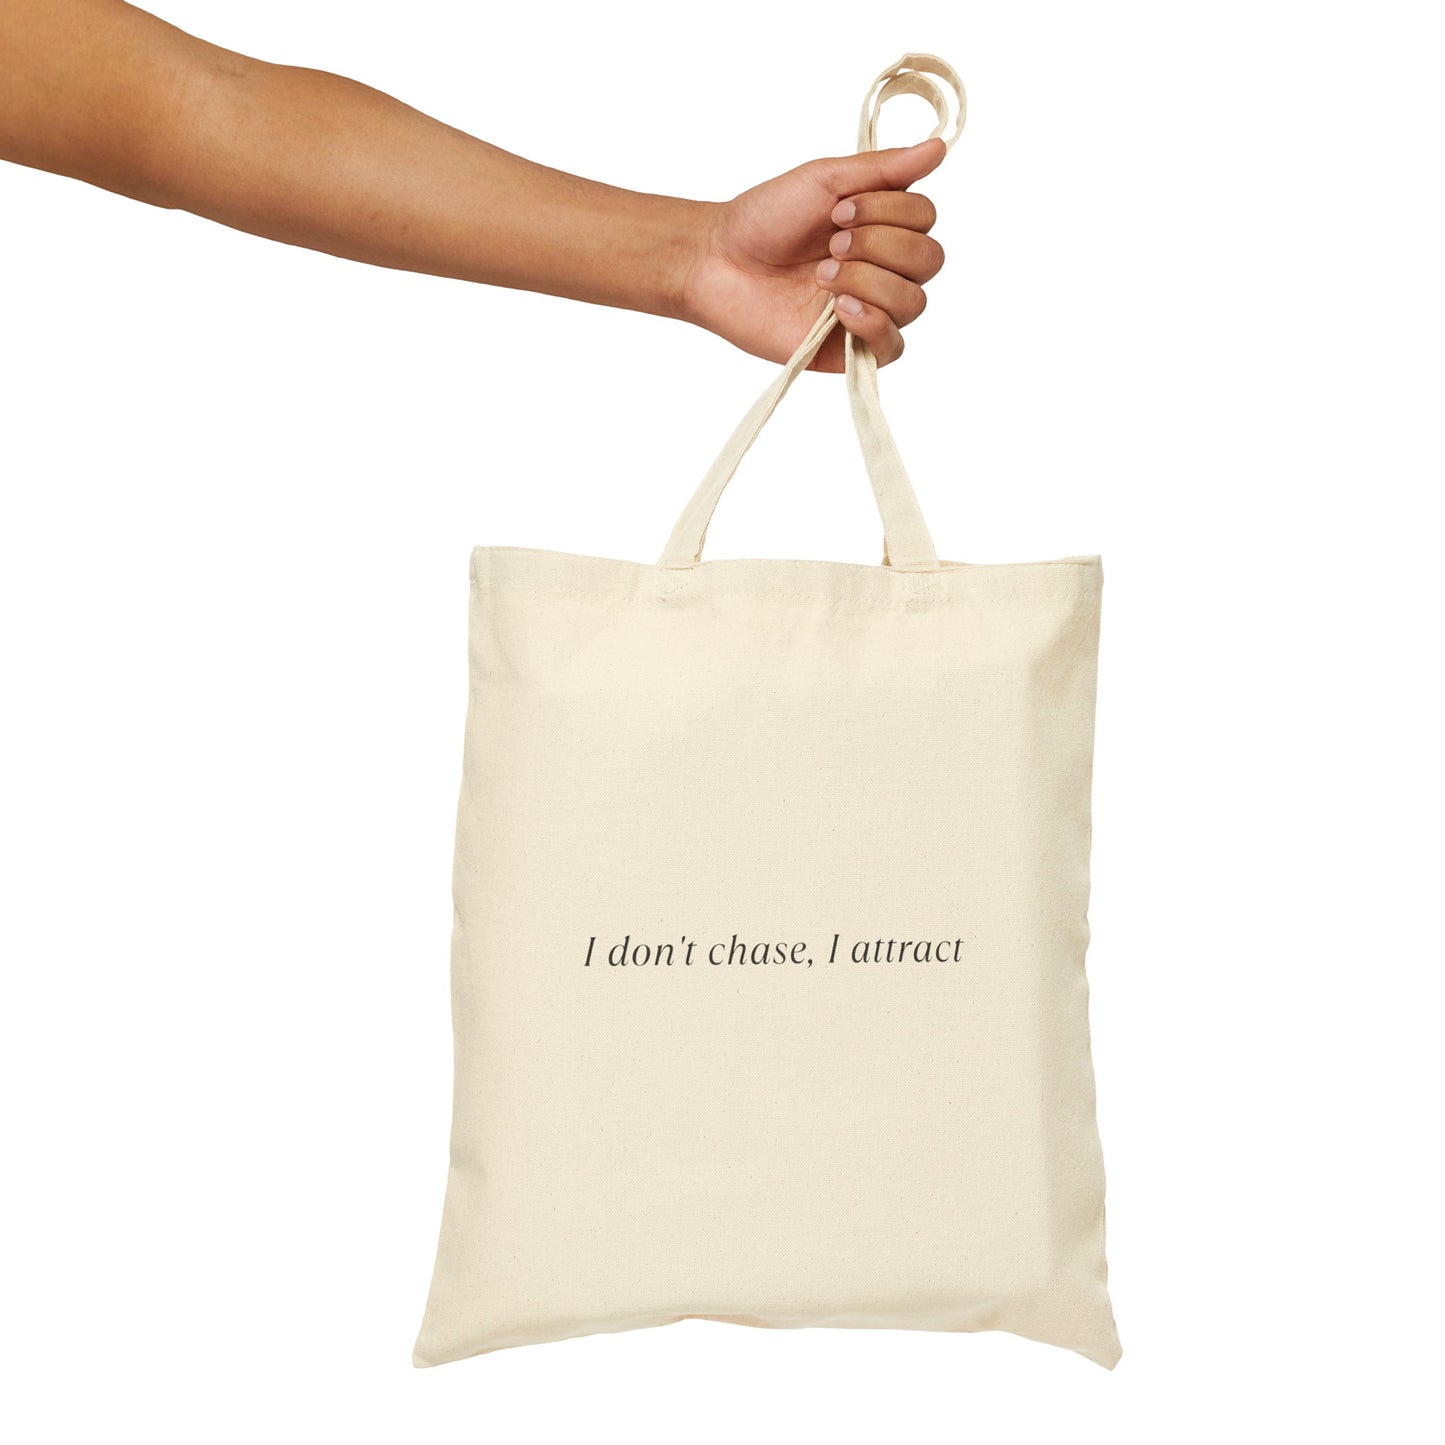 Law of Attraction Tote